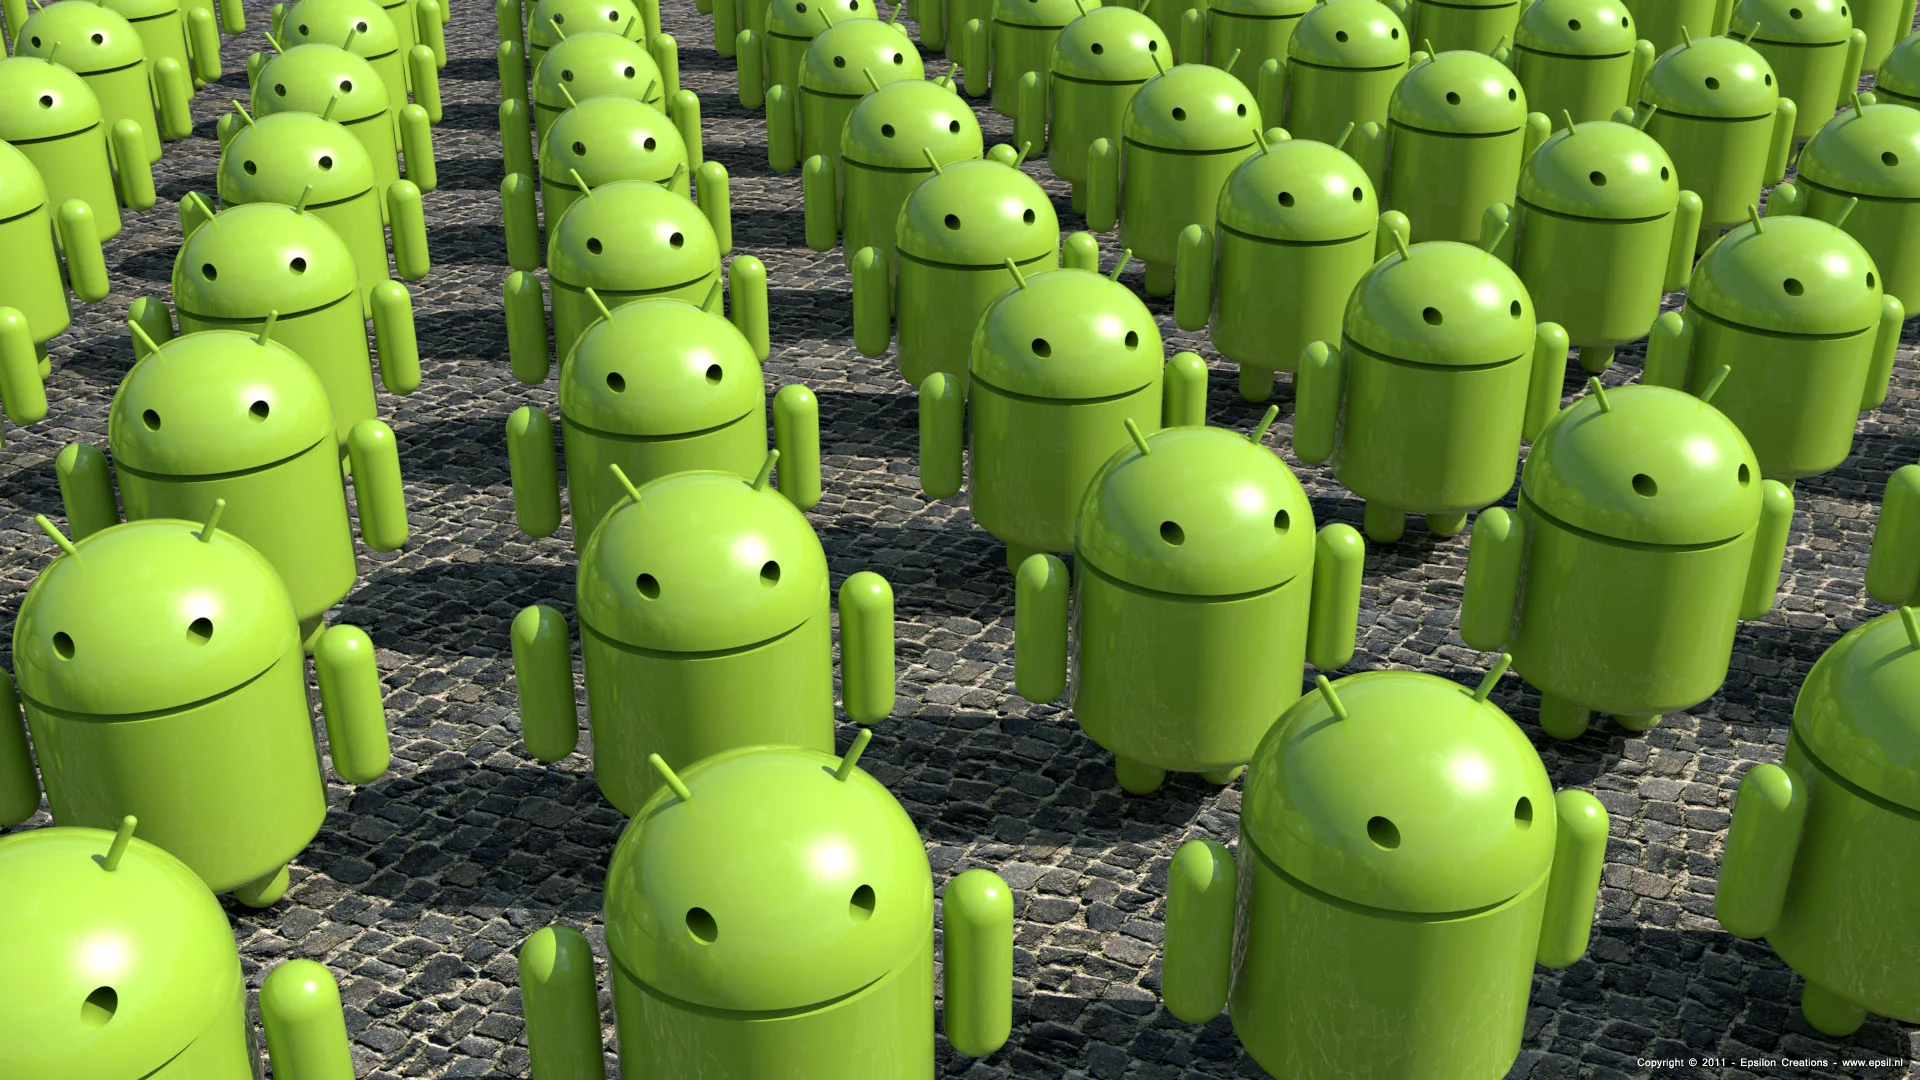 Android Army